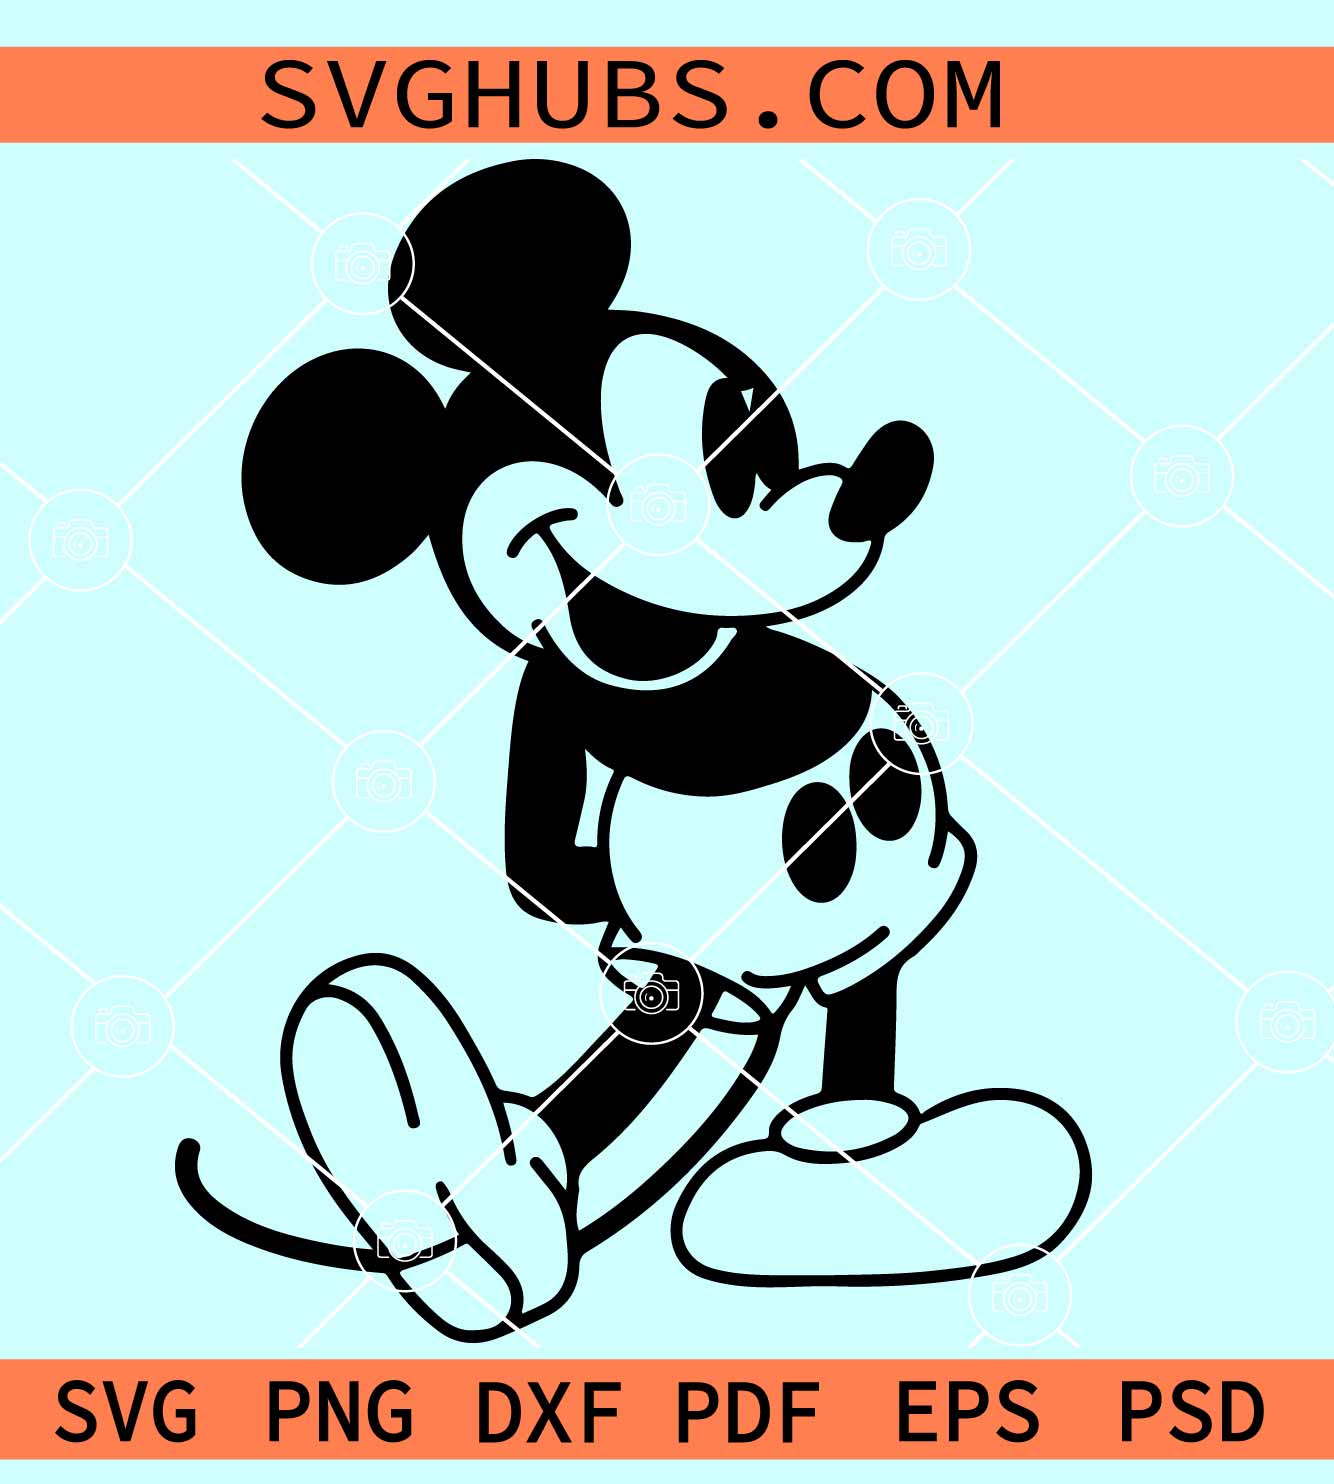 Mickey Mouse Vintage SVG, DXF, PNG, Cut Files For Cricut And